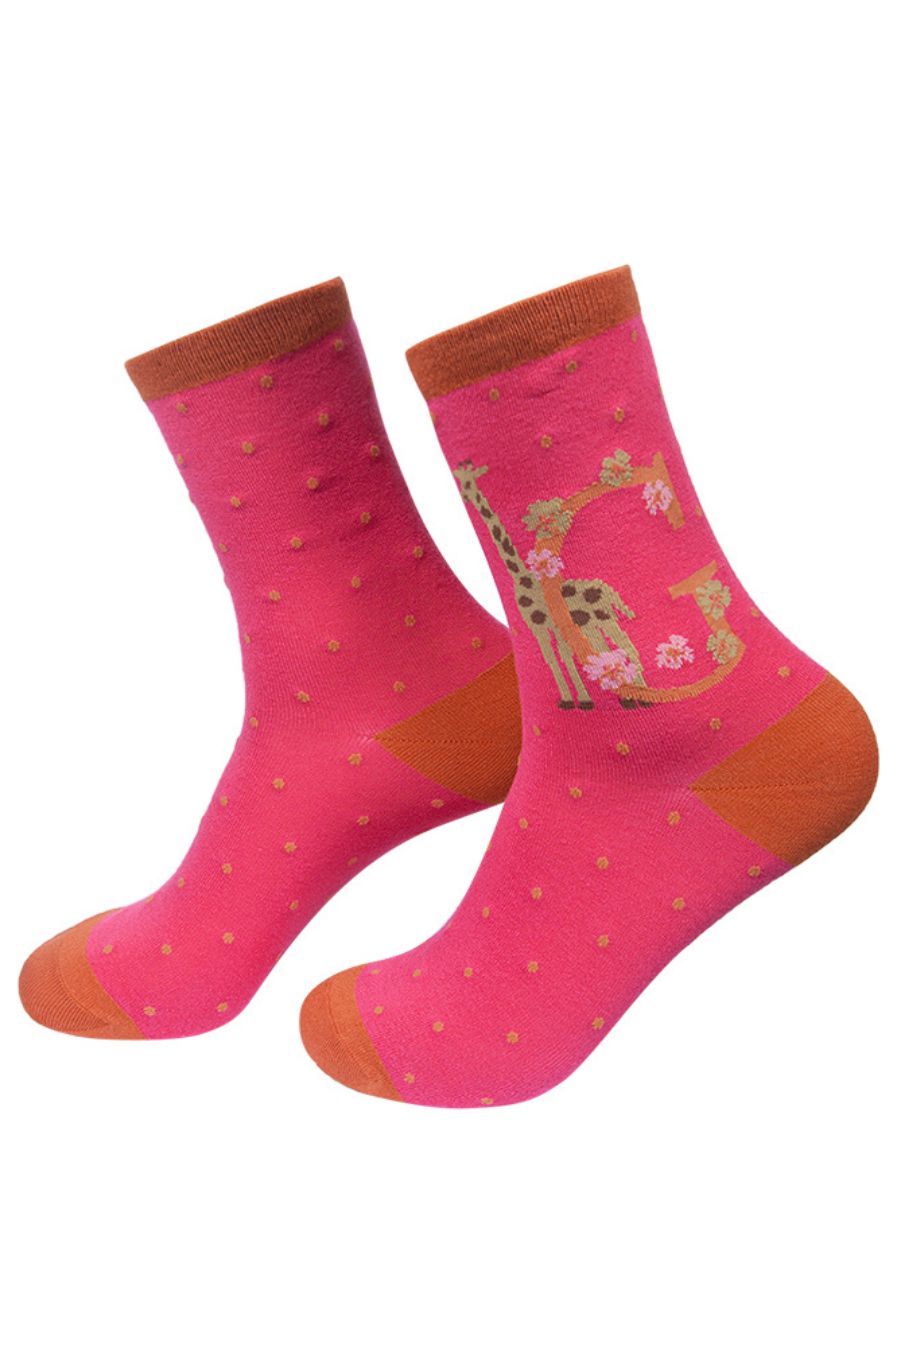 pink, orange ankle socks with the letter G and a giraffe